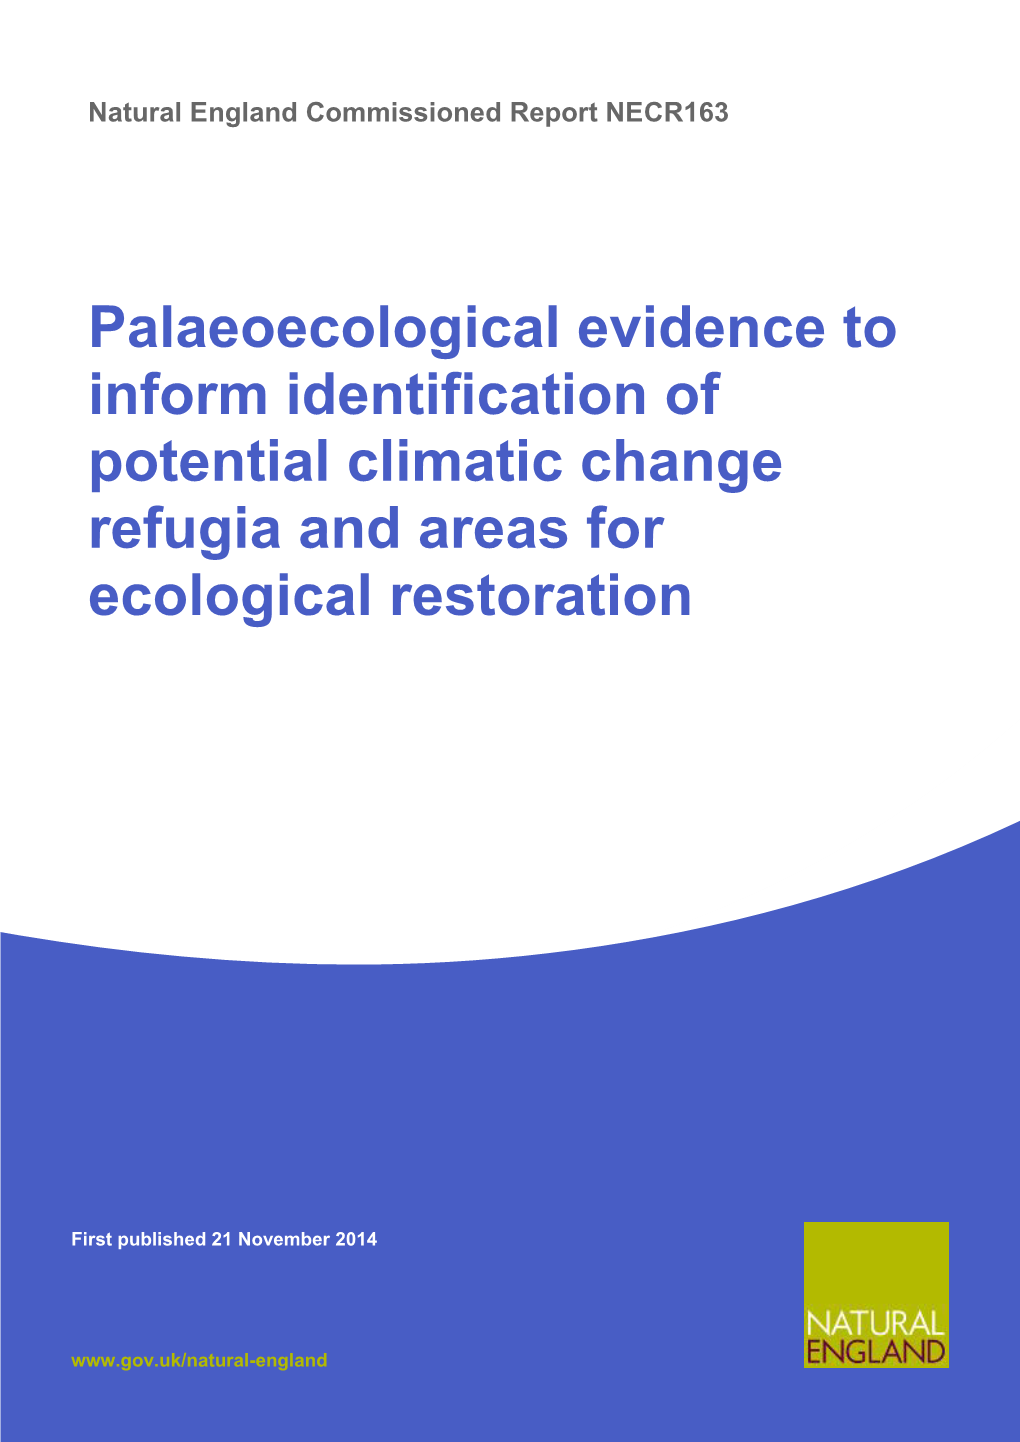 Palaeoecological Evidence to Inform Identification of Potential Climatic Change Refugia and Areas for Ecological Restoration